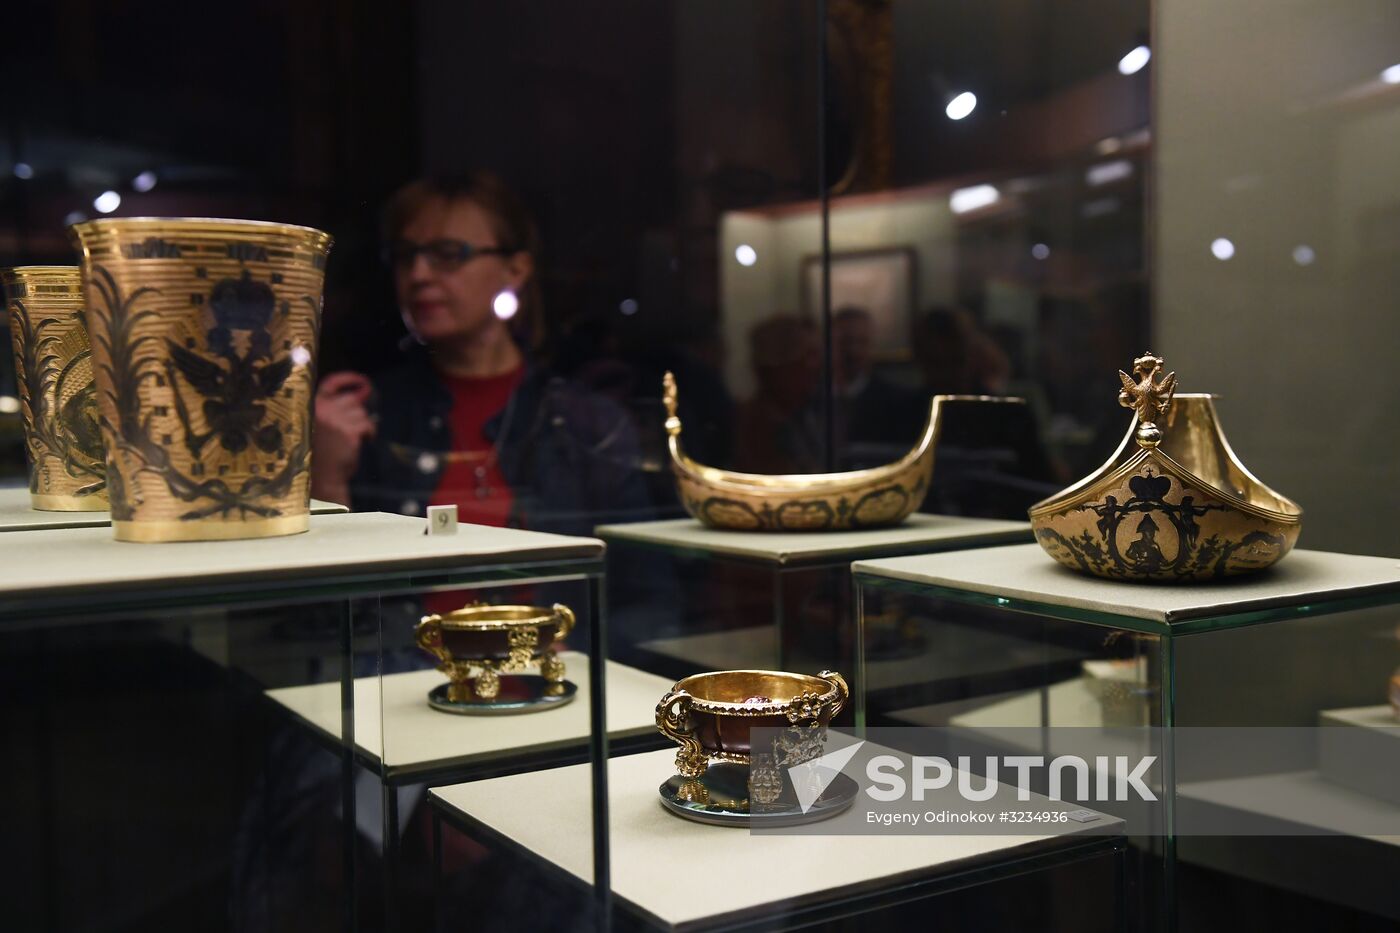 Exhibition, National Treasures of Russia. The 50th Anniversary of the Diamond Fund Exhibition